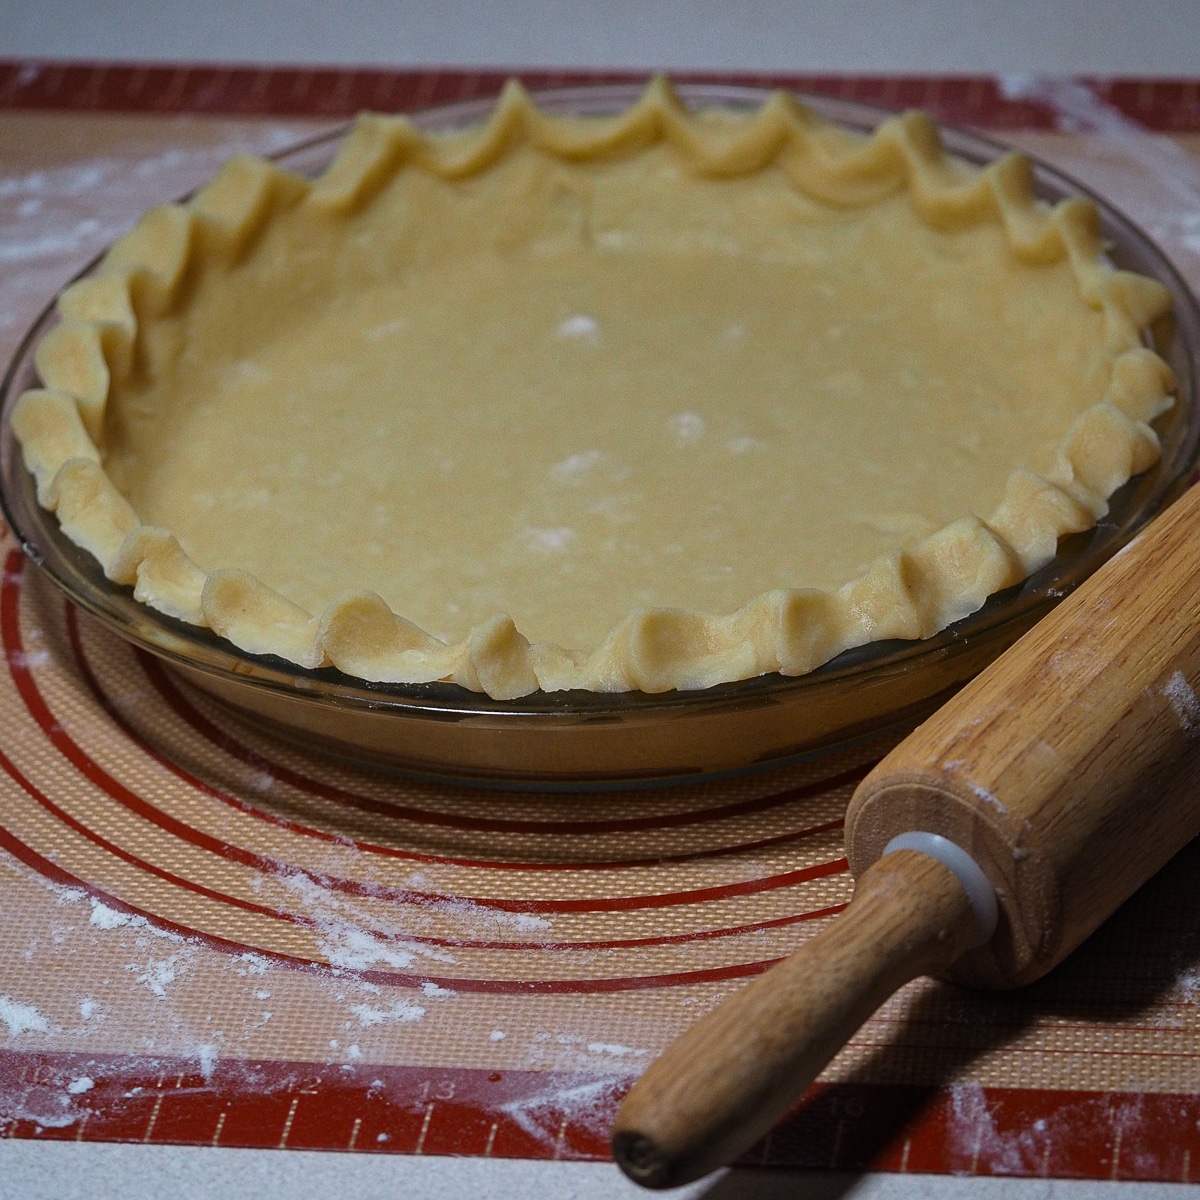 How to make all-purpose pie crust?